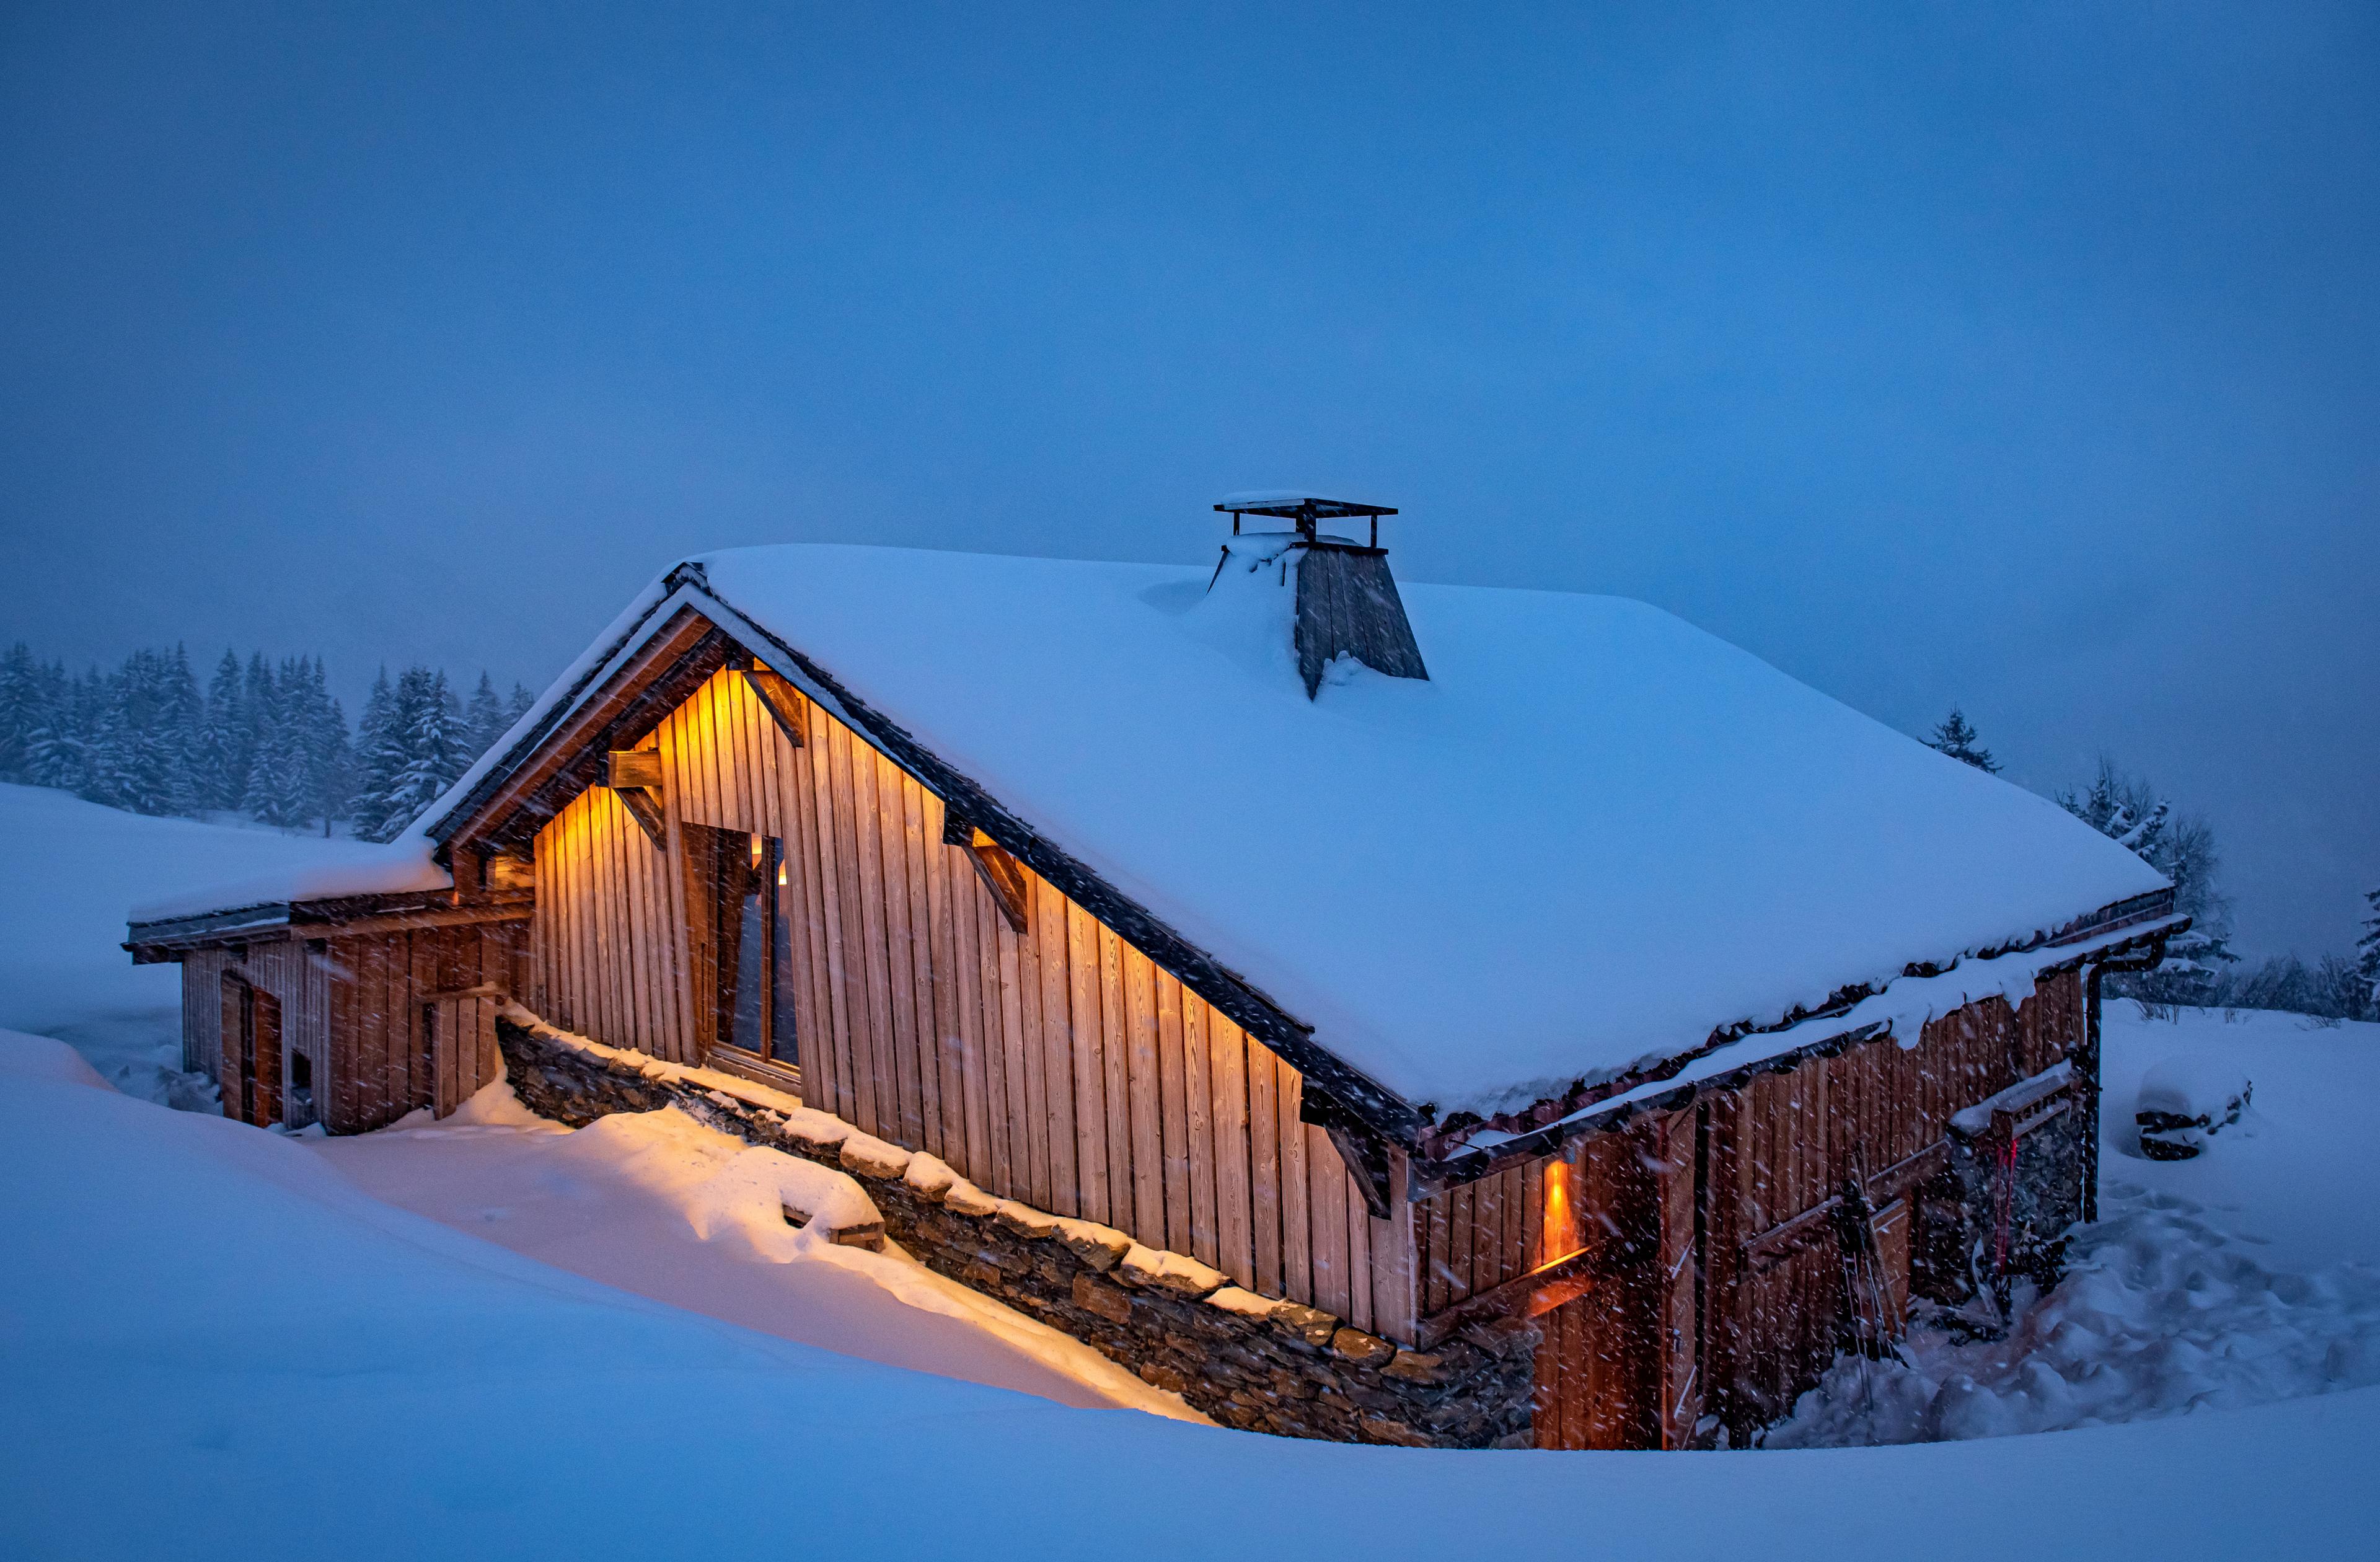 view of the chalet in winter